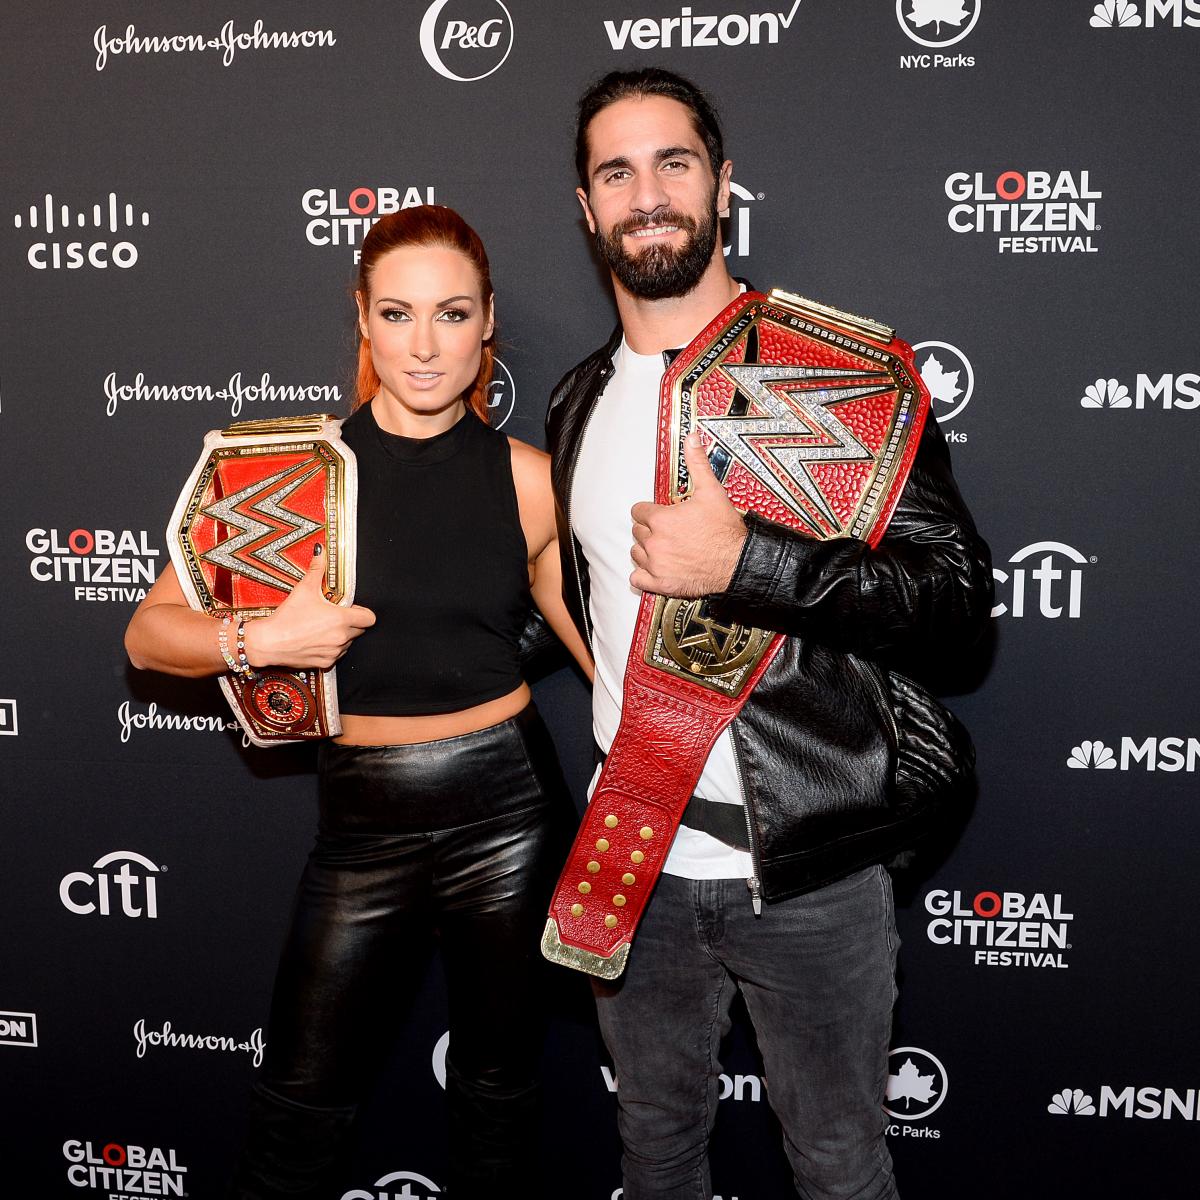 Becky Lynch & Seth Rollins Argue About Who Is The Man